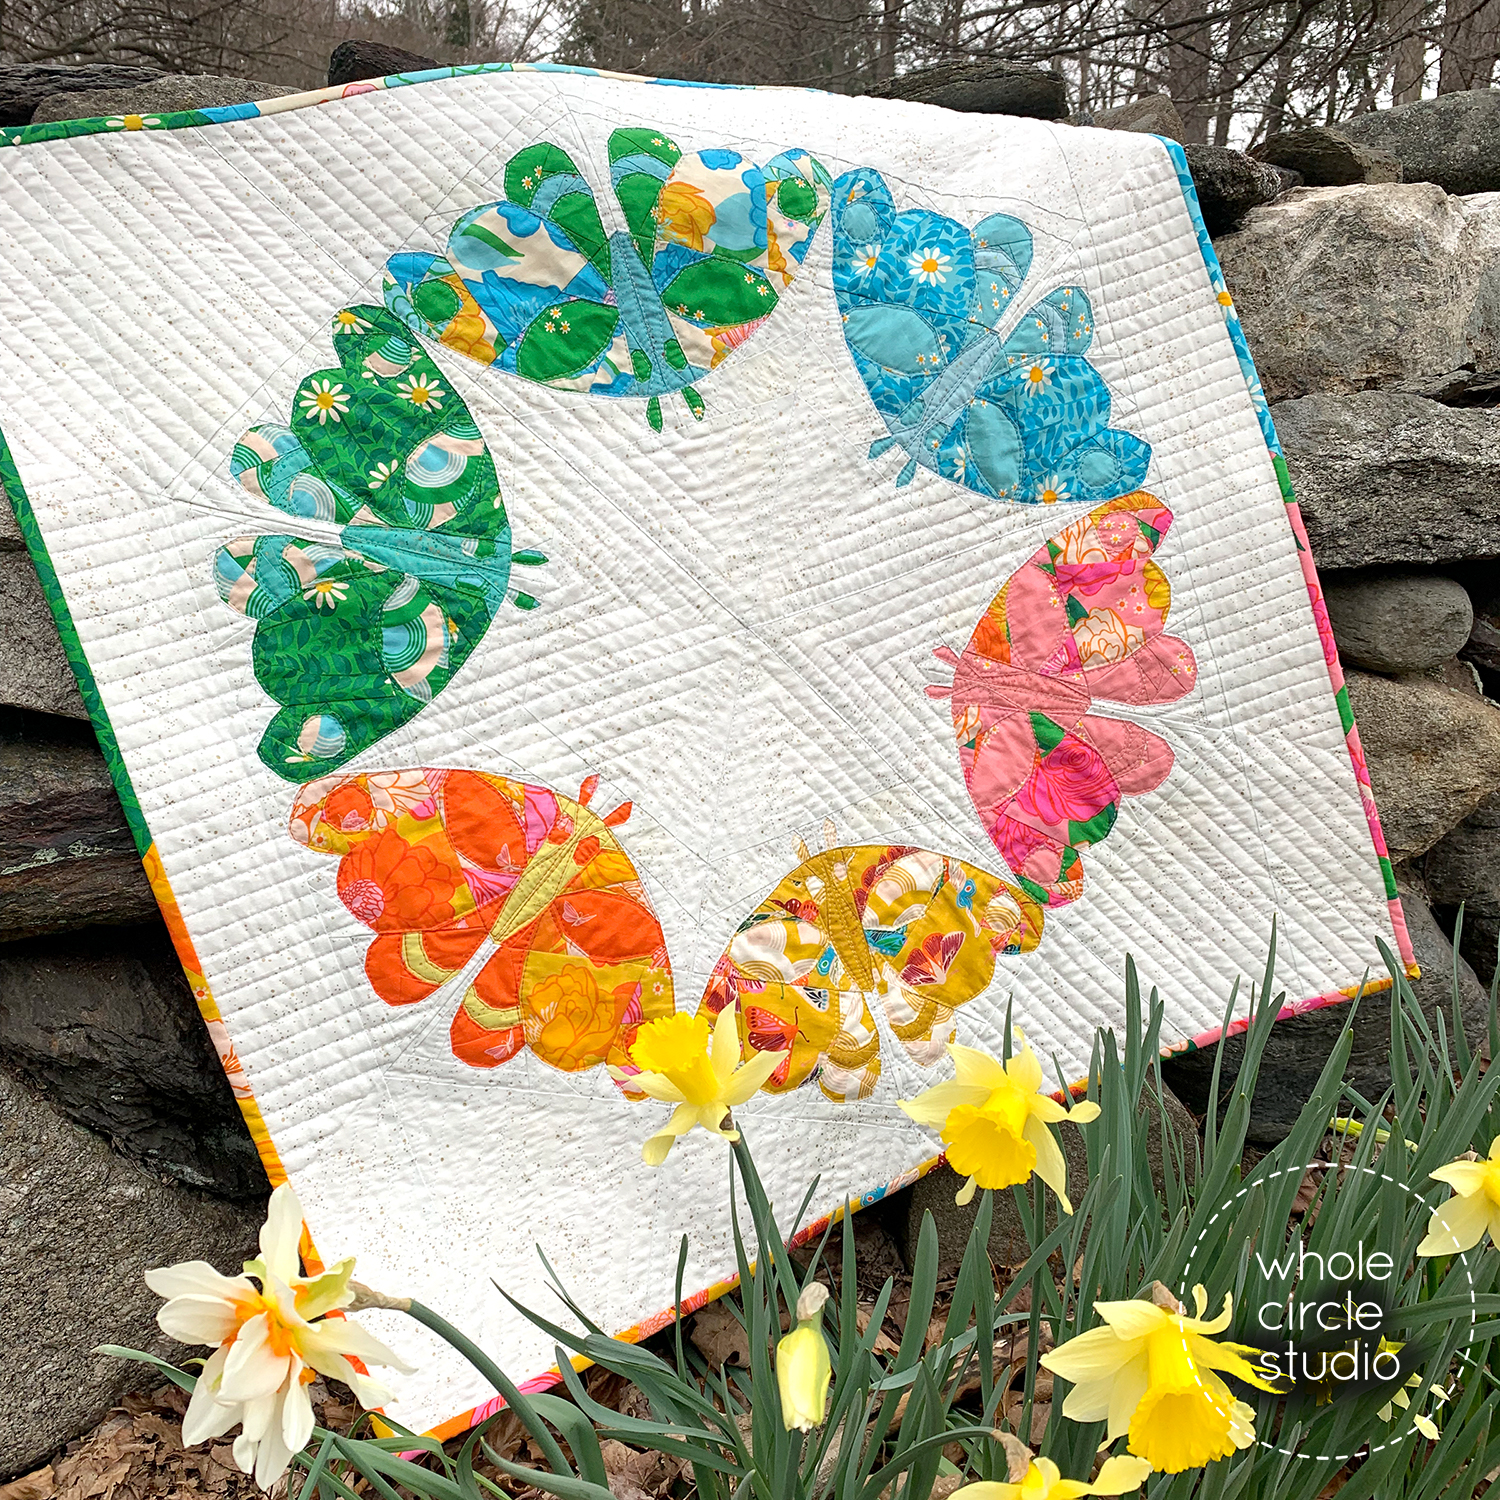 quilt that has 6 colorful moths arranged in a circle.